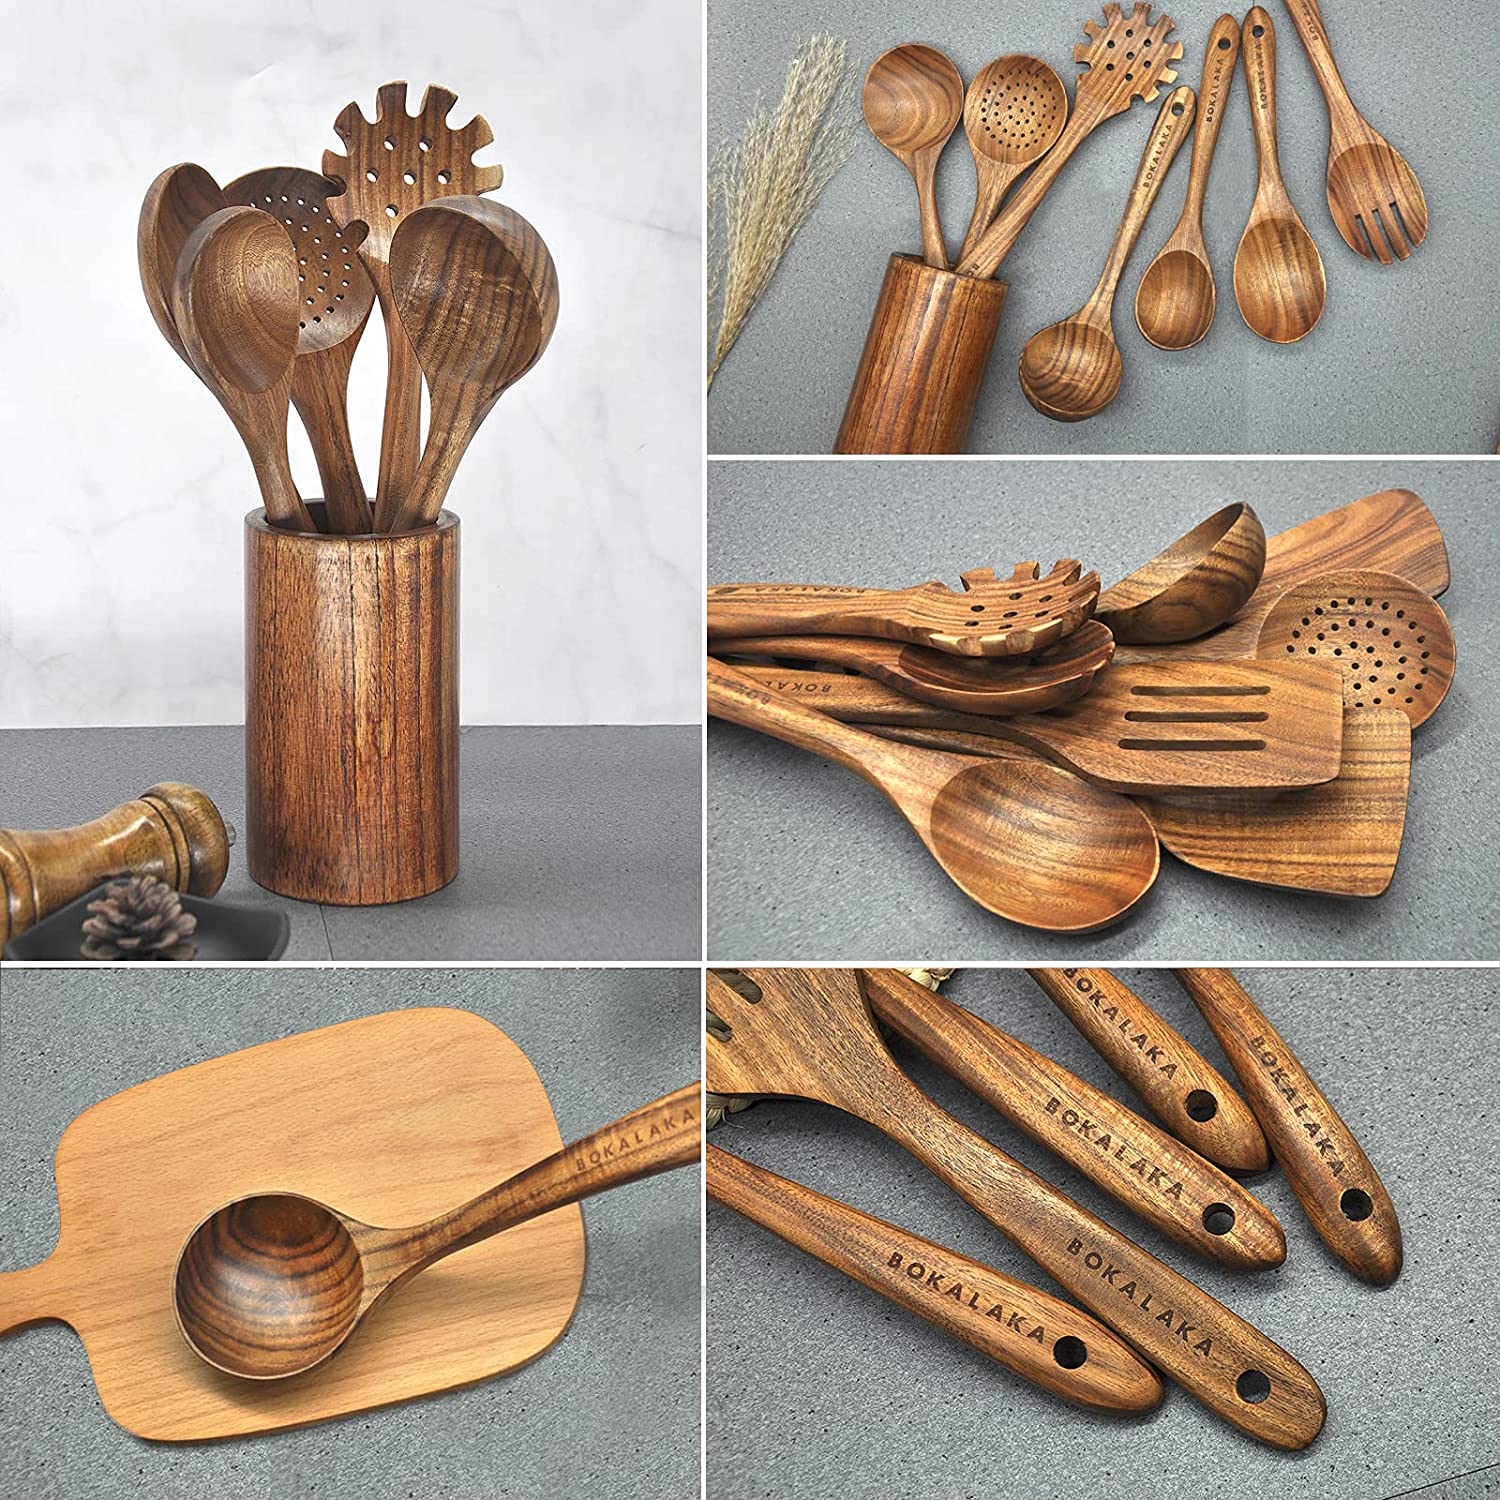 https://discounttoday.net/wp-content/uploads/2022/12/BOKALAKA-Wooden-Spoons-for-Cooking10-Pcs-Natural-Teak-Wooden-Kitchen-Utensils-Set-Wooden-Utensils-for-Cooking-Wooden-Cooking-Utensils-Wooden-Spatulas-for-Cooking2.jpg